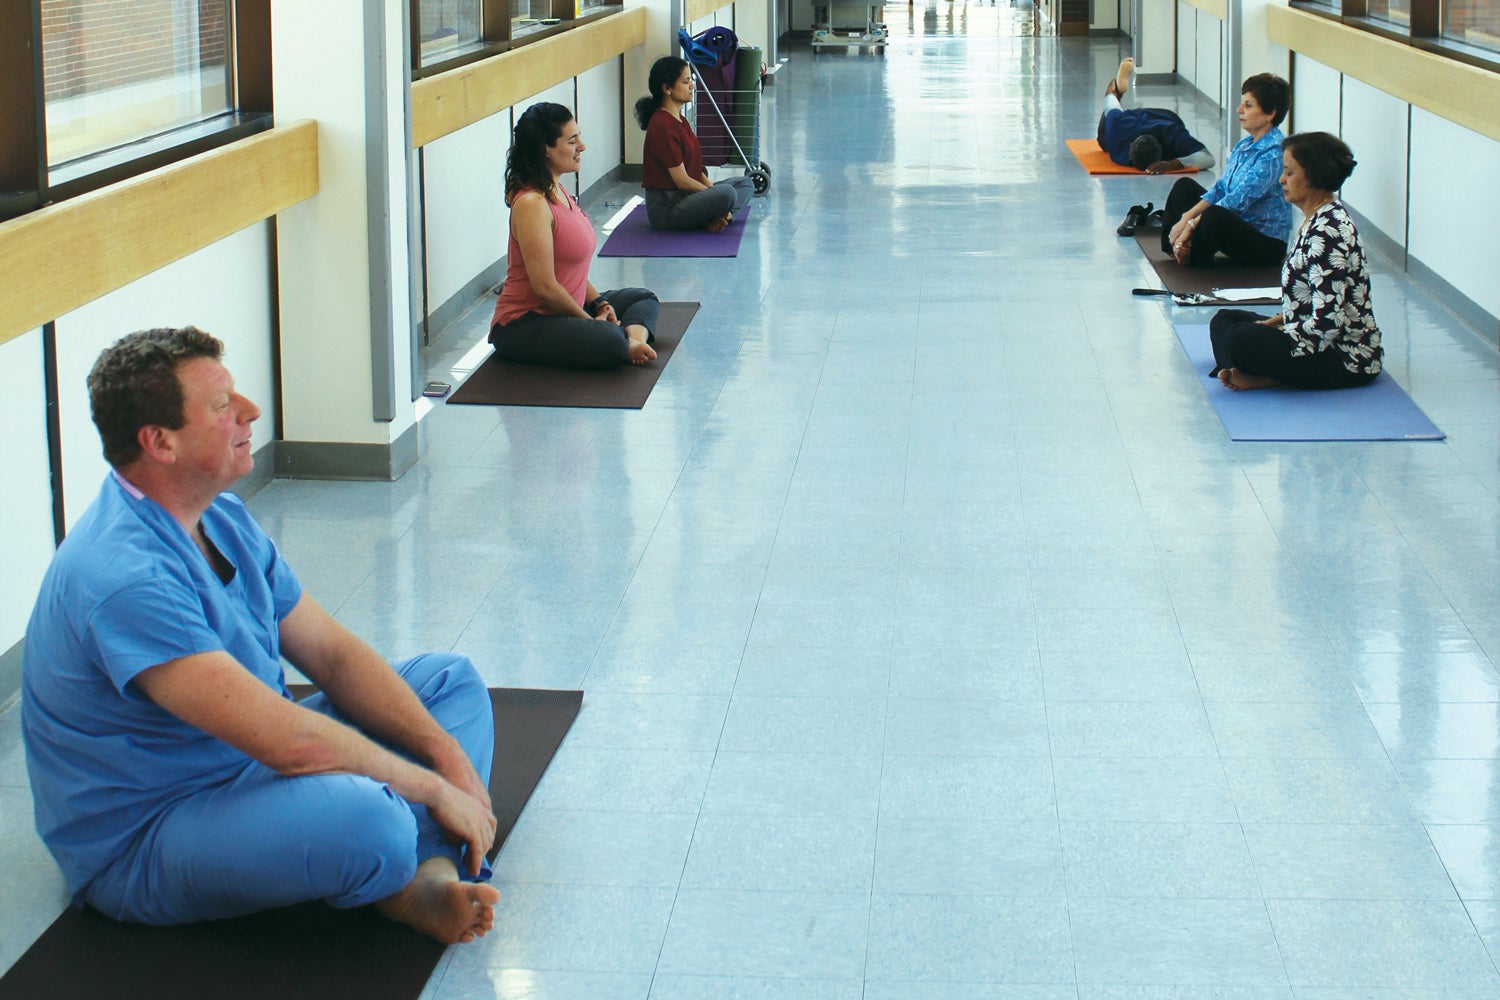 On-site yoga classes before the pandemic offered a respite during busy shifts.